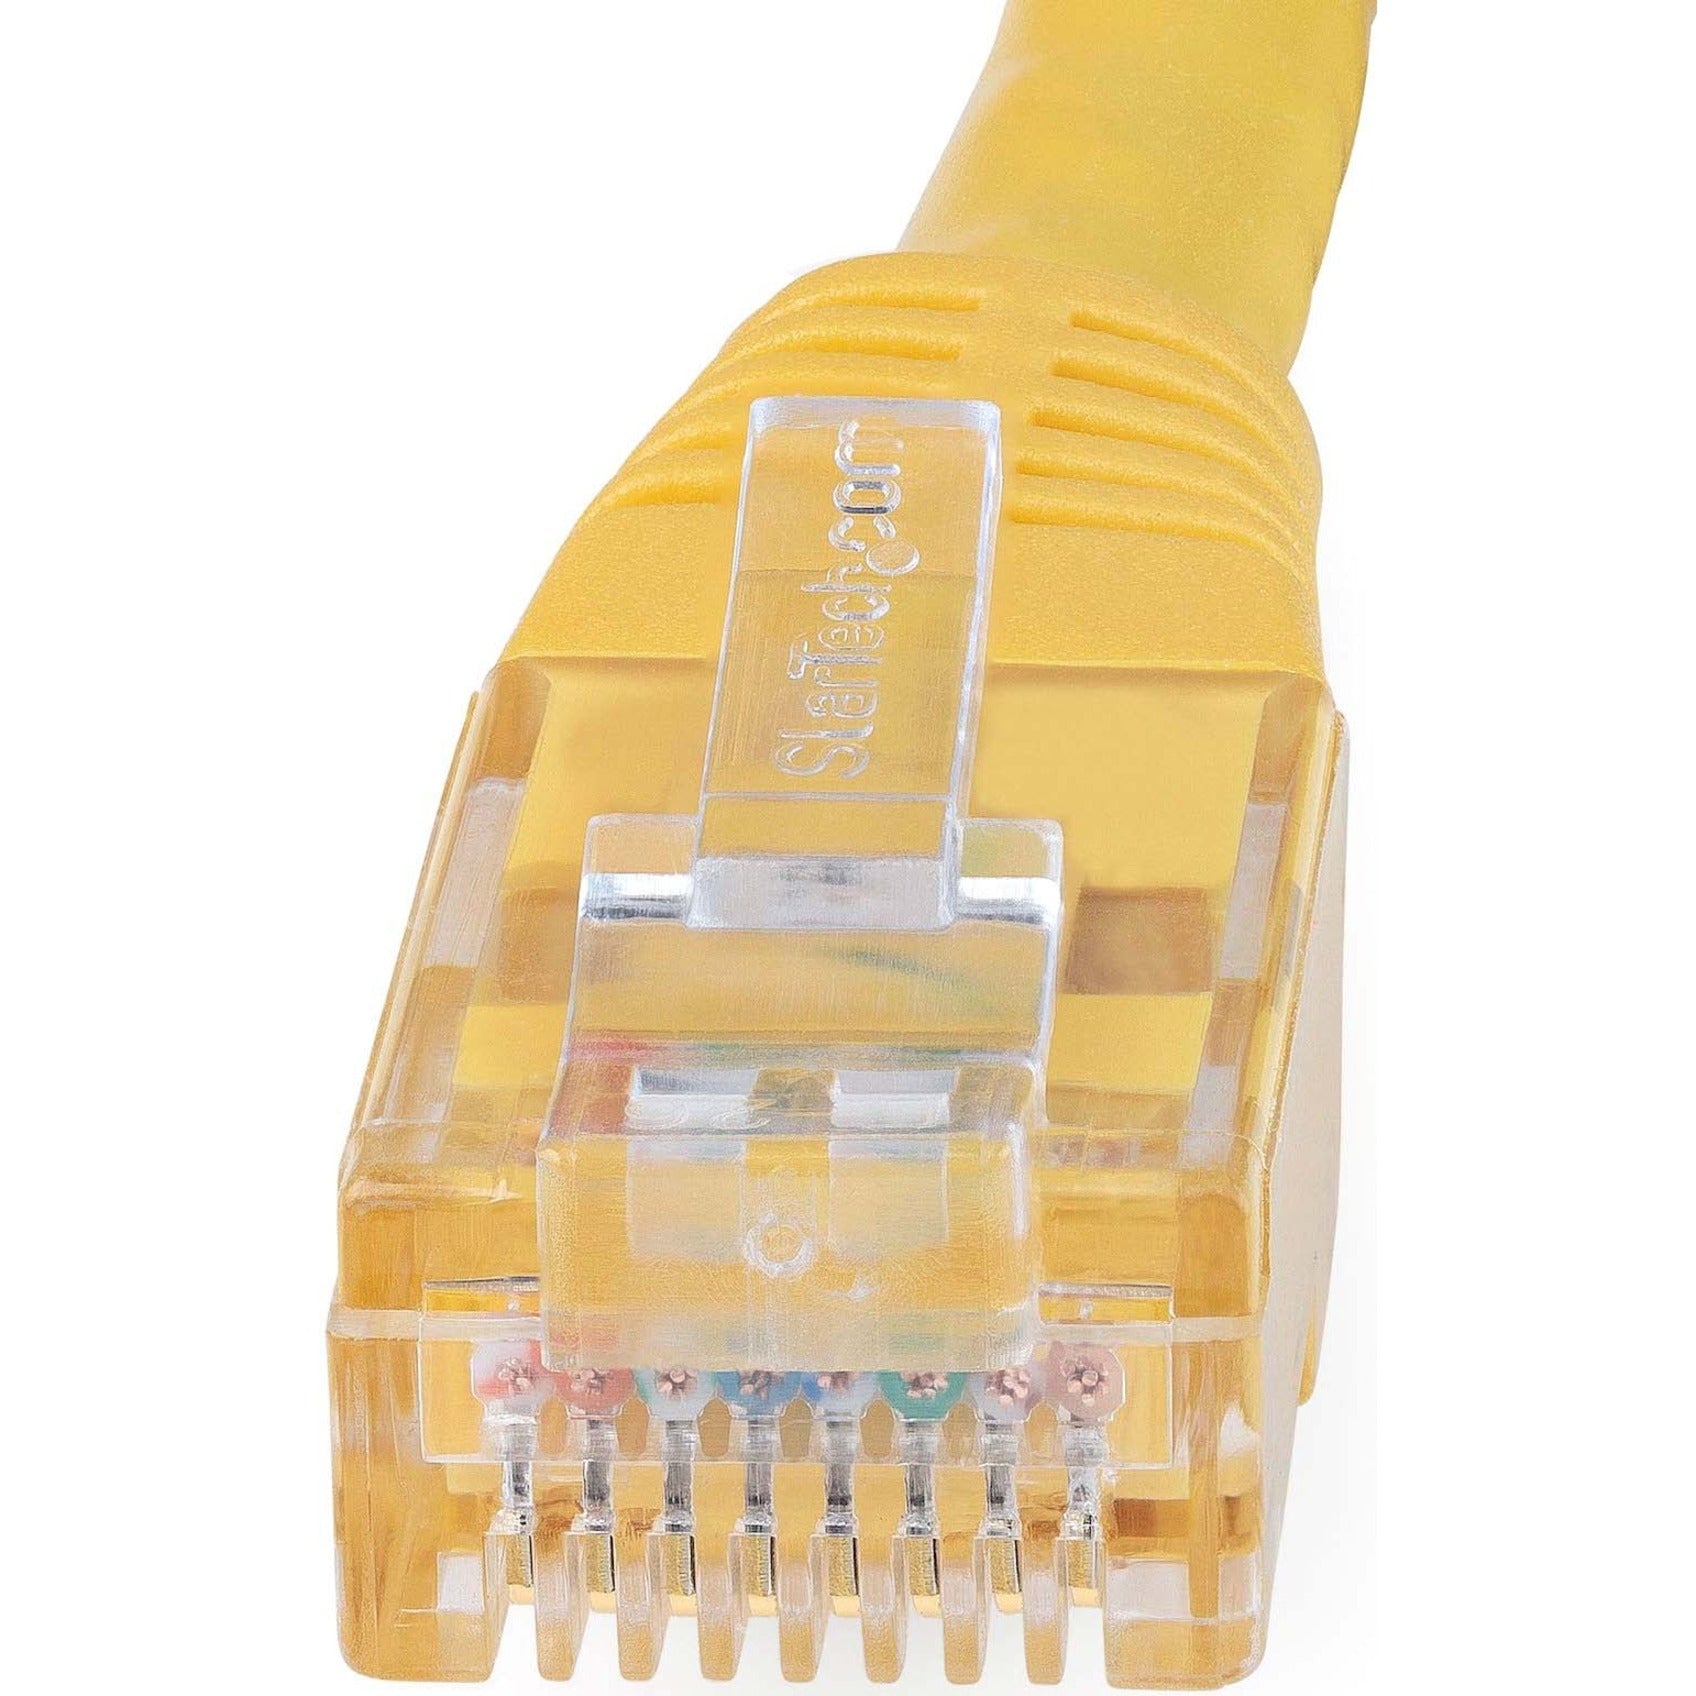 StarTech.com C6PATCH35YL 35ft Yellow Cat6 UTP Patch Cable ETL Verified, Fray Resistant, Molded, PoE, Strain Relief, Damage Resistant, Corrosion Resistant, Rust Resistant, Bend Resistant, Stranded, PoE++, Snagless, 10 Gbit/s